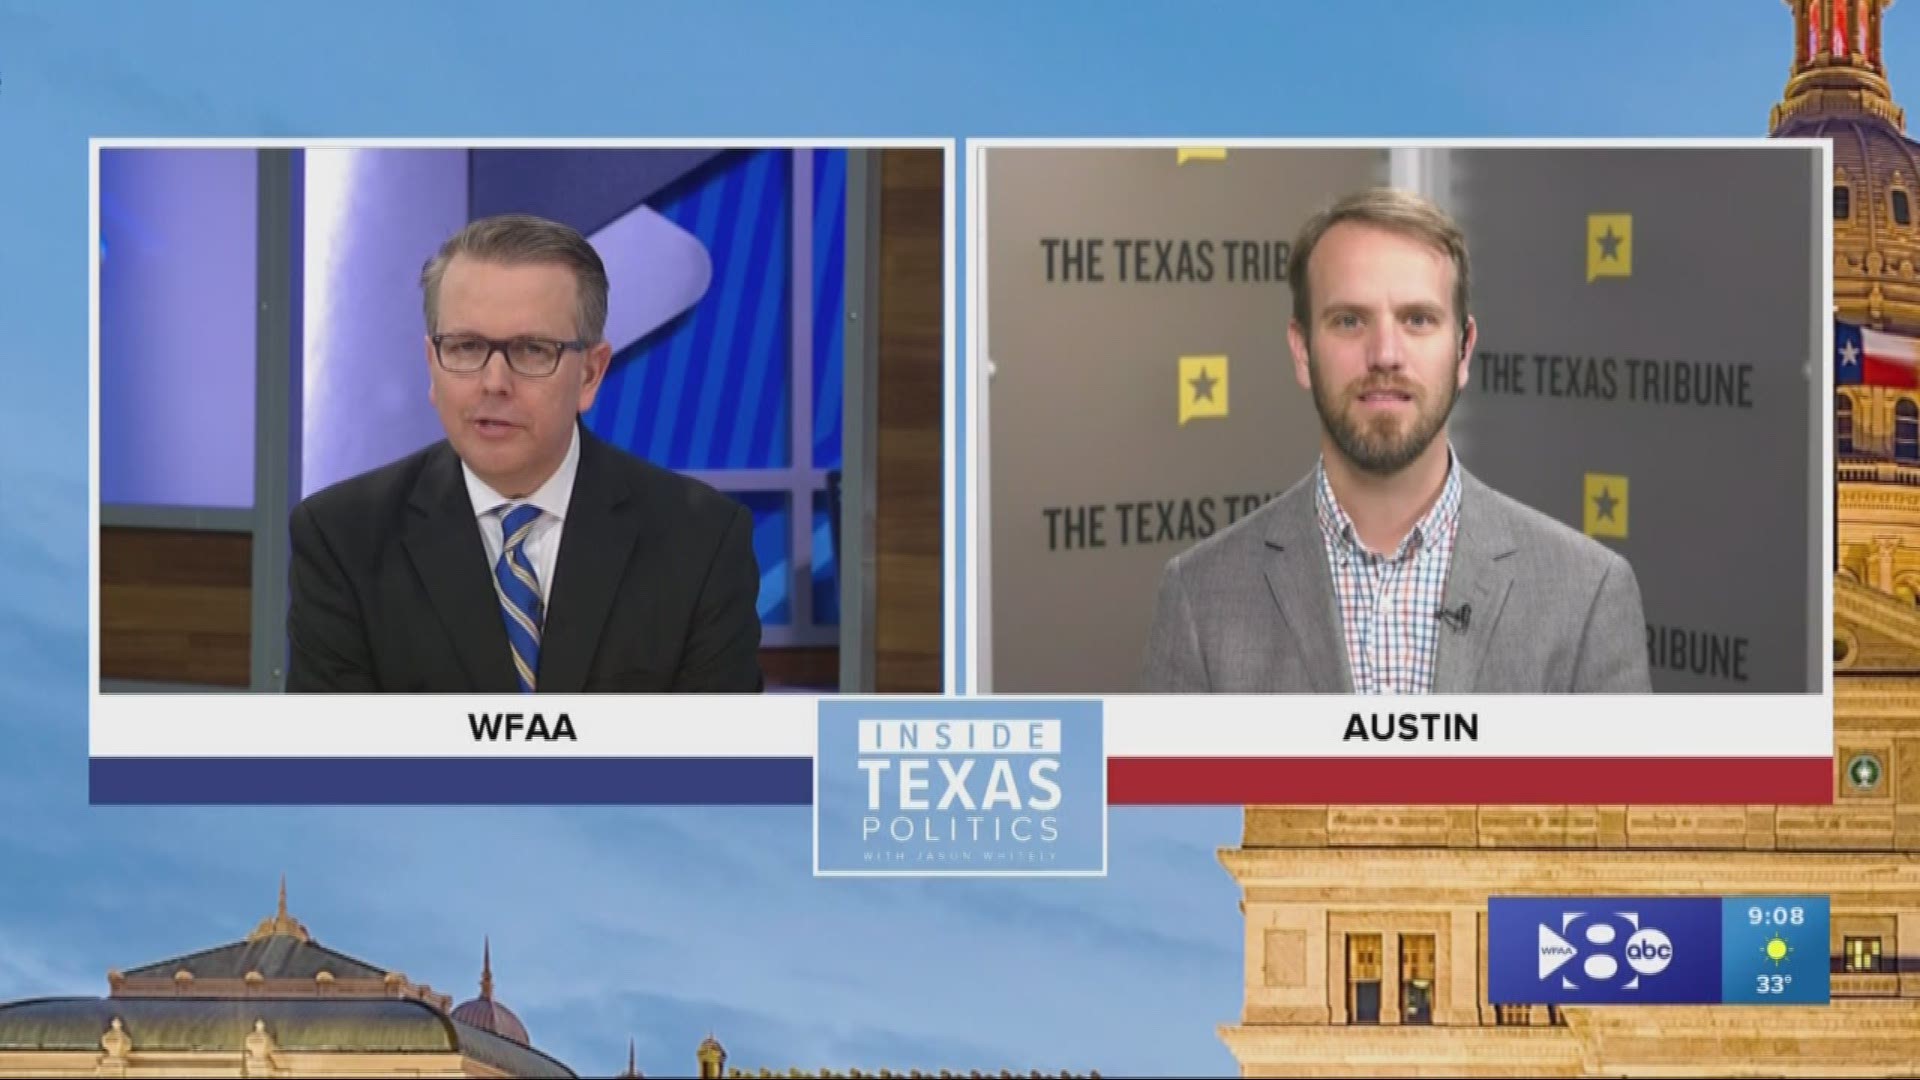 Matthew Watkins, the managing editor for the Texas Tribune, joined host Jason Whitely to discuss what’s behind Abbott’s decision.